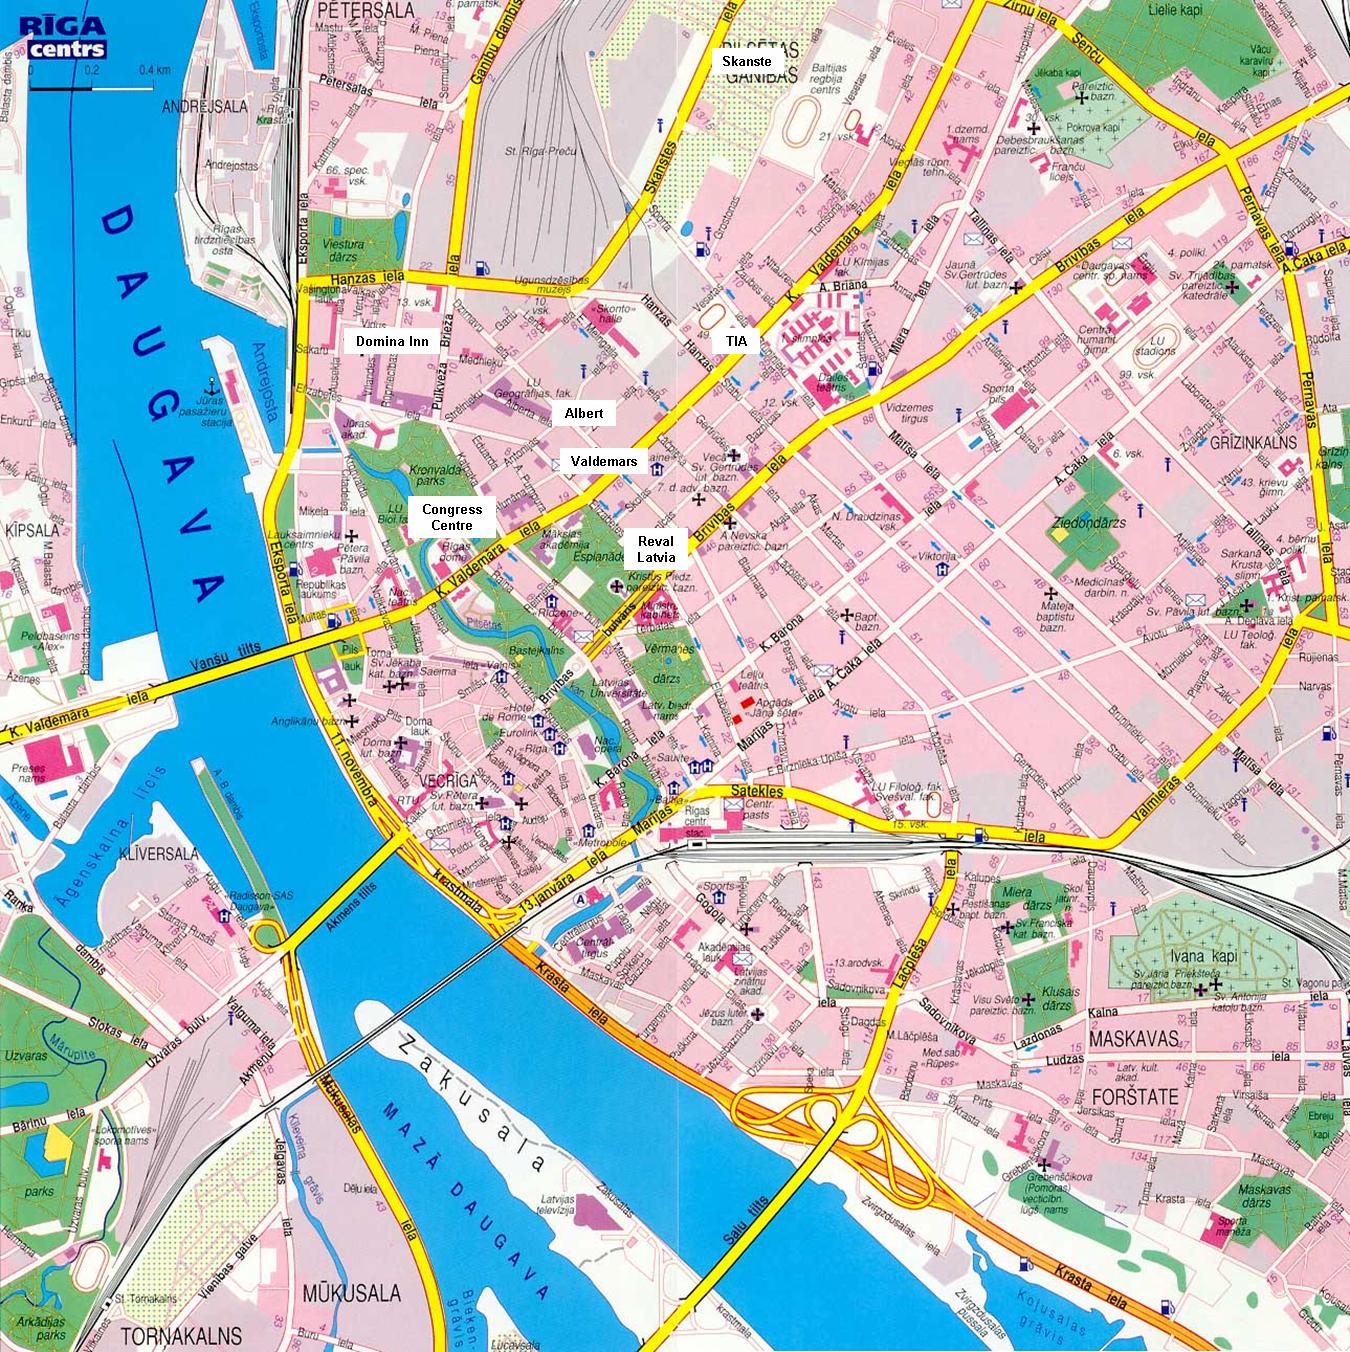 Maps of Riga | Maps – Map of Subway, Metro Map, Map of Europe, Map ...